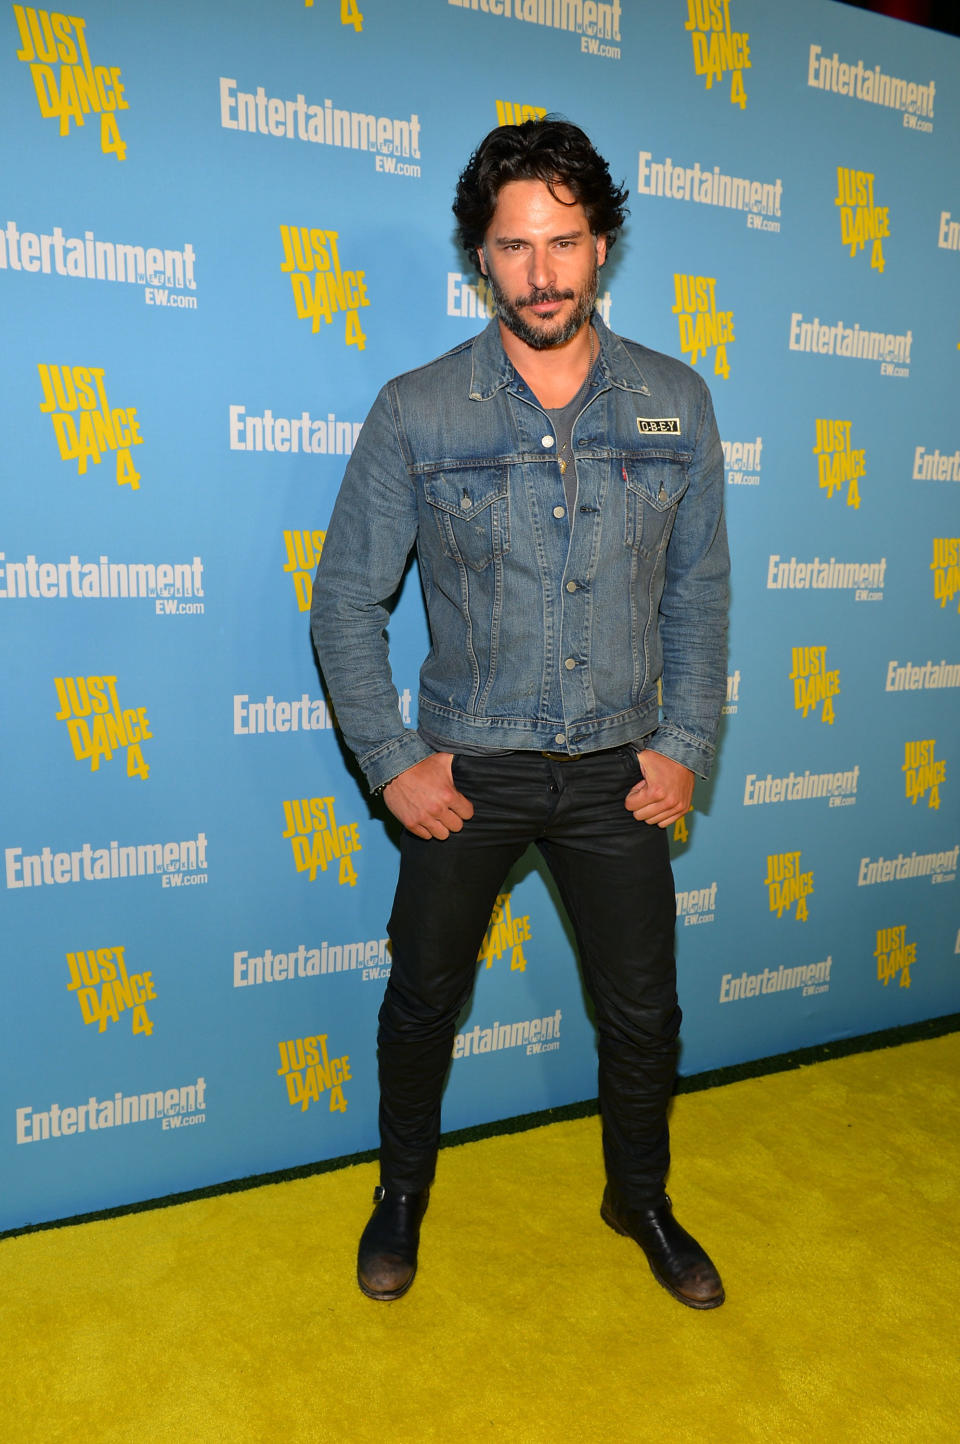 Entertainment Weekly's 6th Annual Comic-Con Celebration Sponsored By Just Dance 4